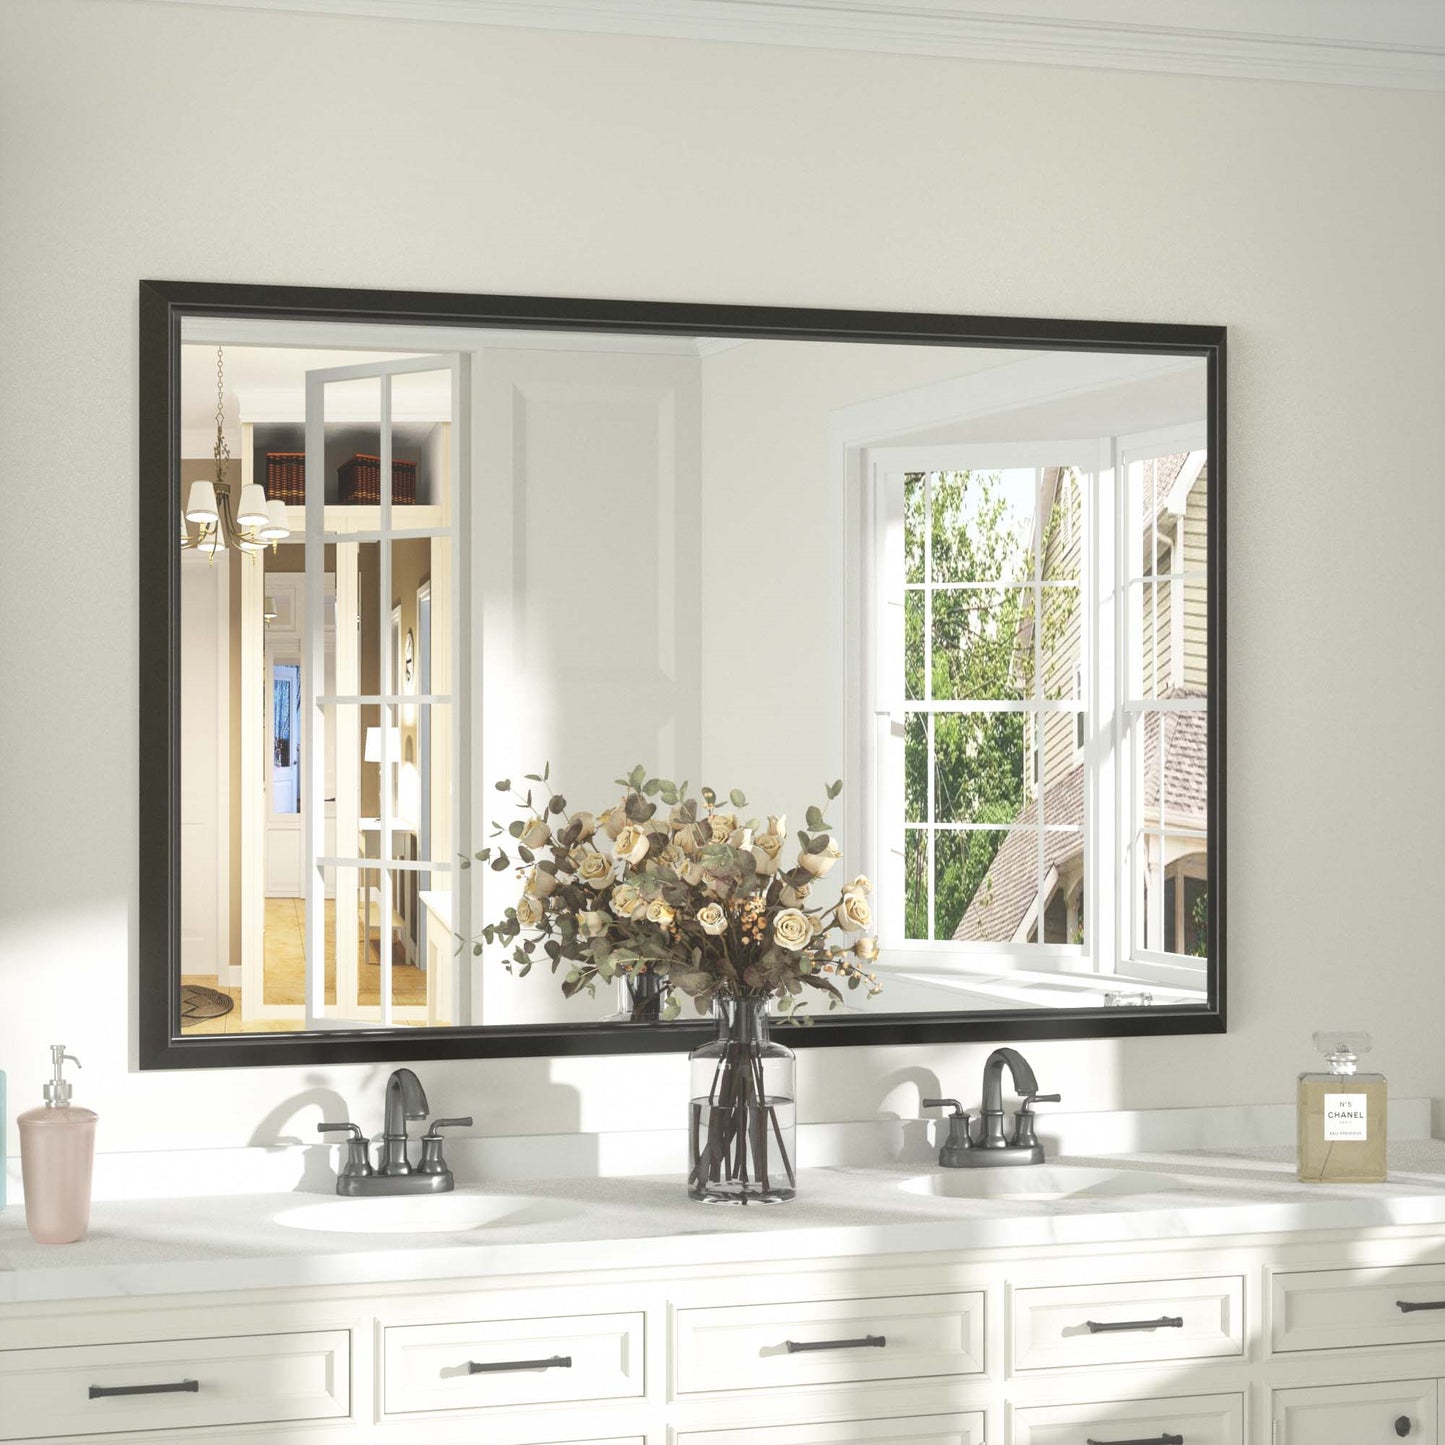 
                  
                    55 x 36 Inch | PILOCOS Modern Rustic Large Beveled Frame Bathroom Mirrors for Wall
                  
                